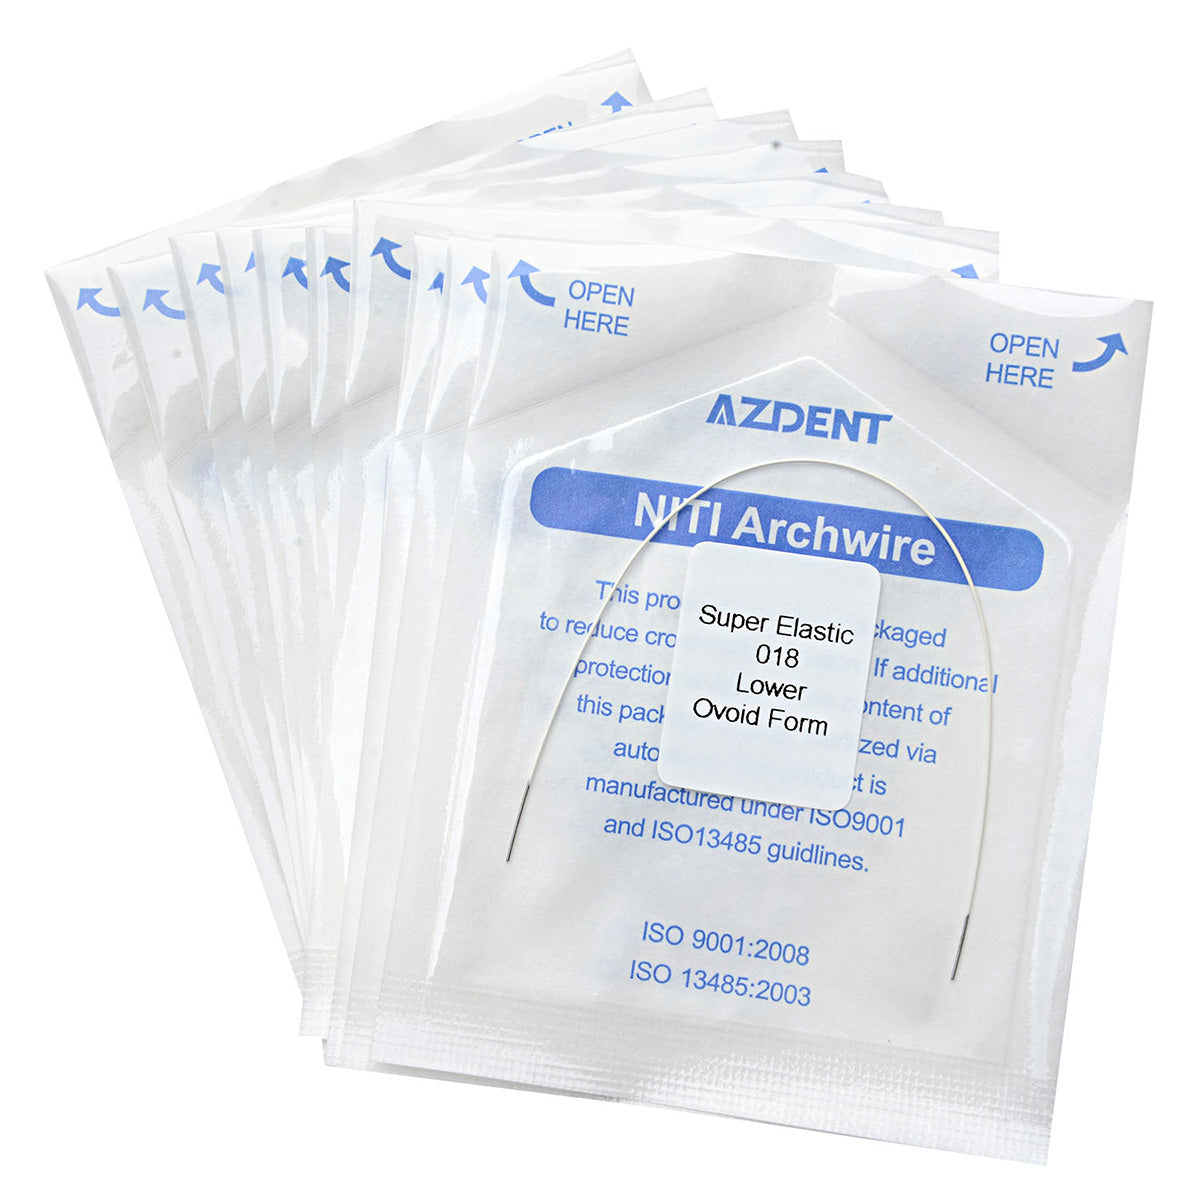 10 Packs AZDENT Archwire NiTi Super Elastic Colored Coated Ovoid Round 0.018 Lower 1pcs/Pack - azdentall.com